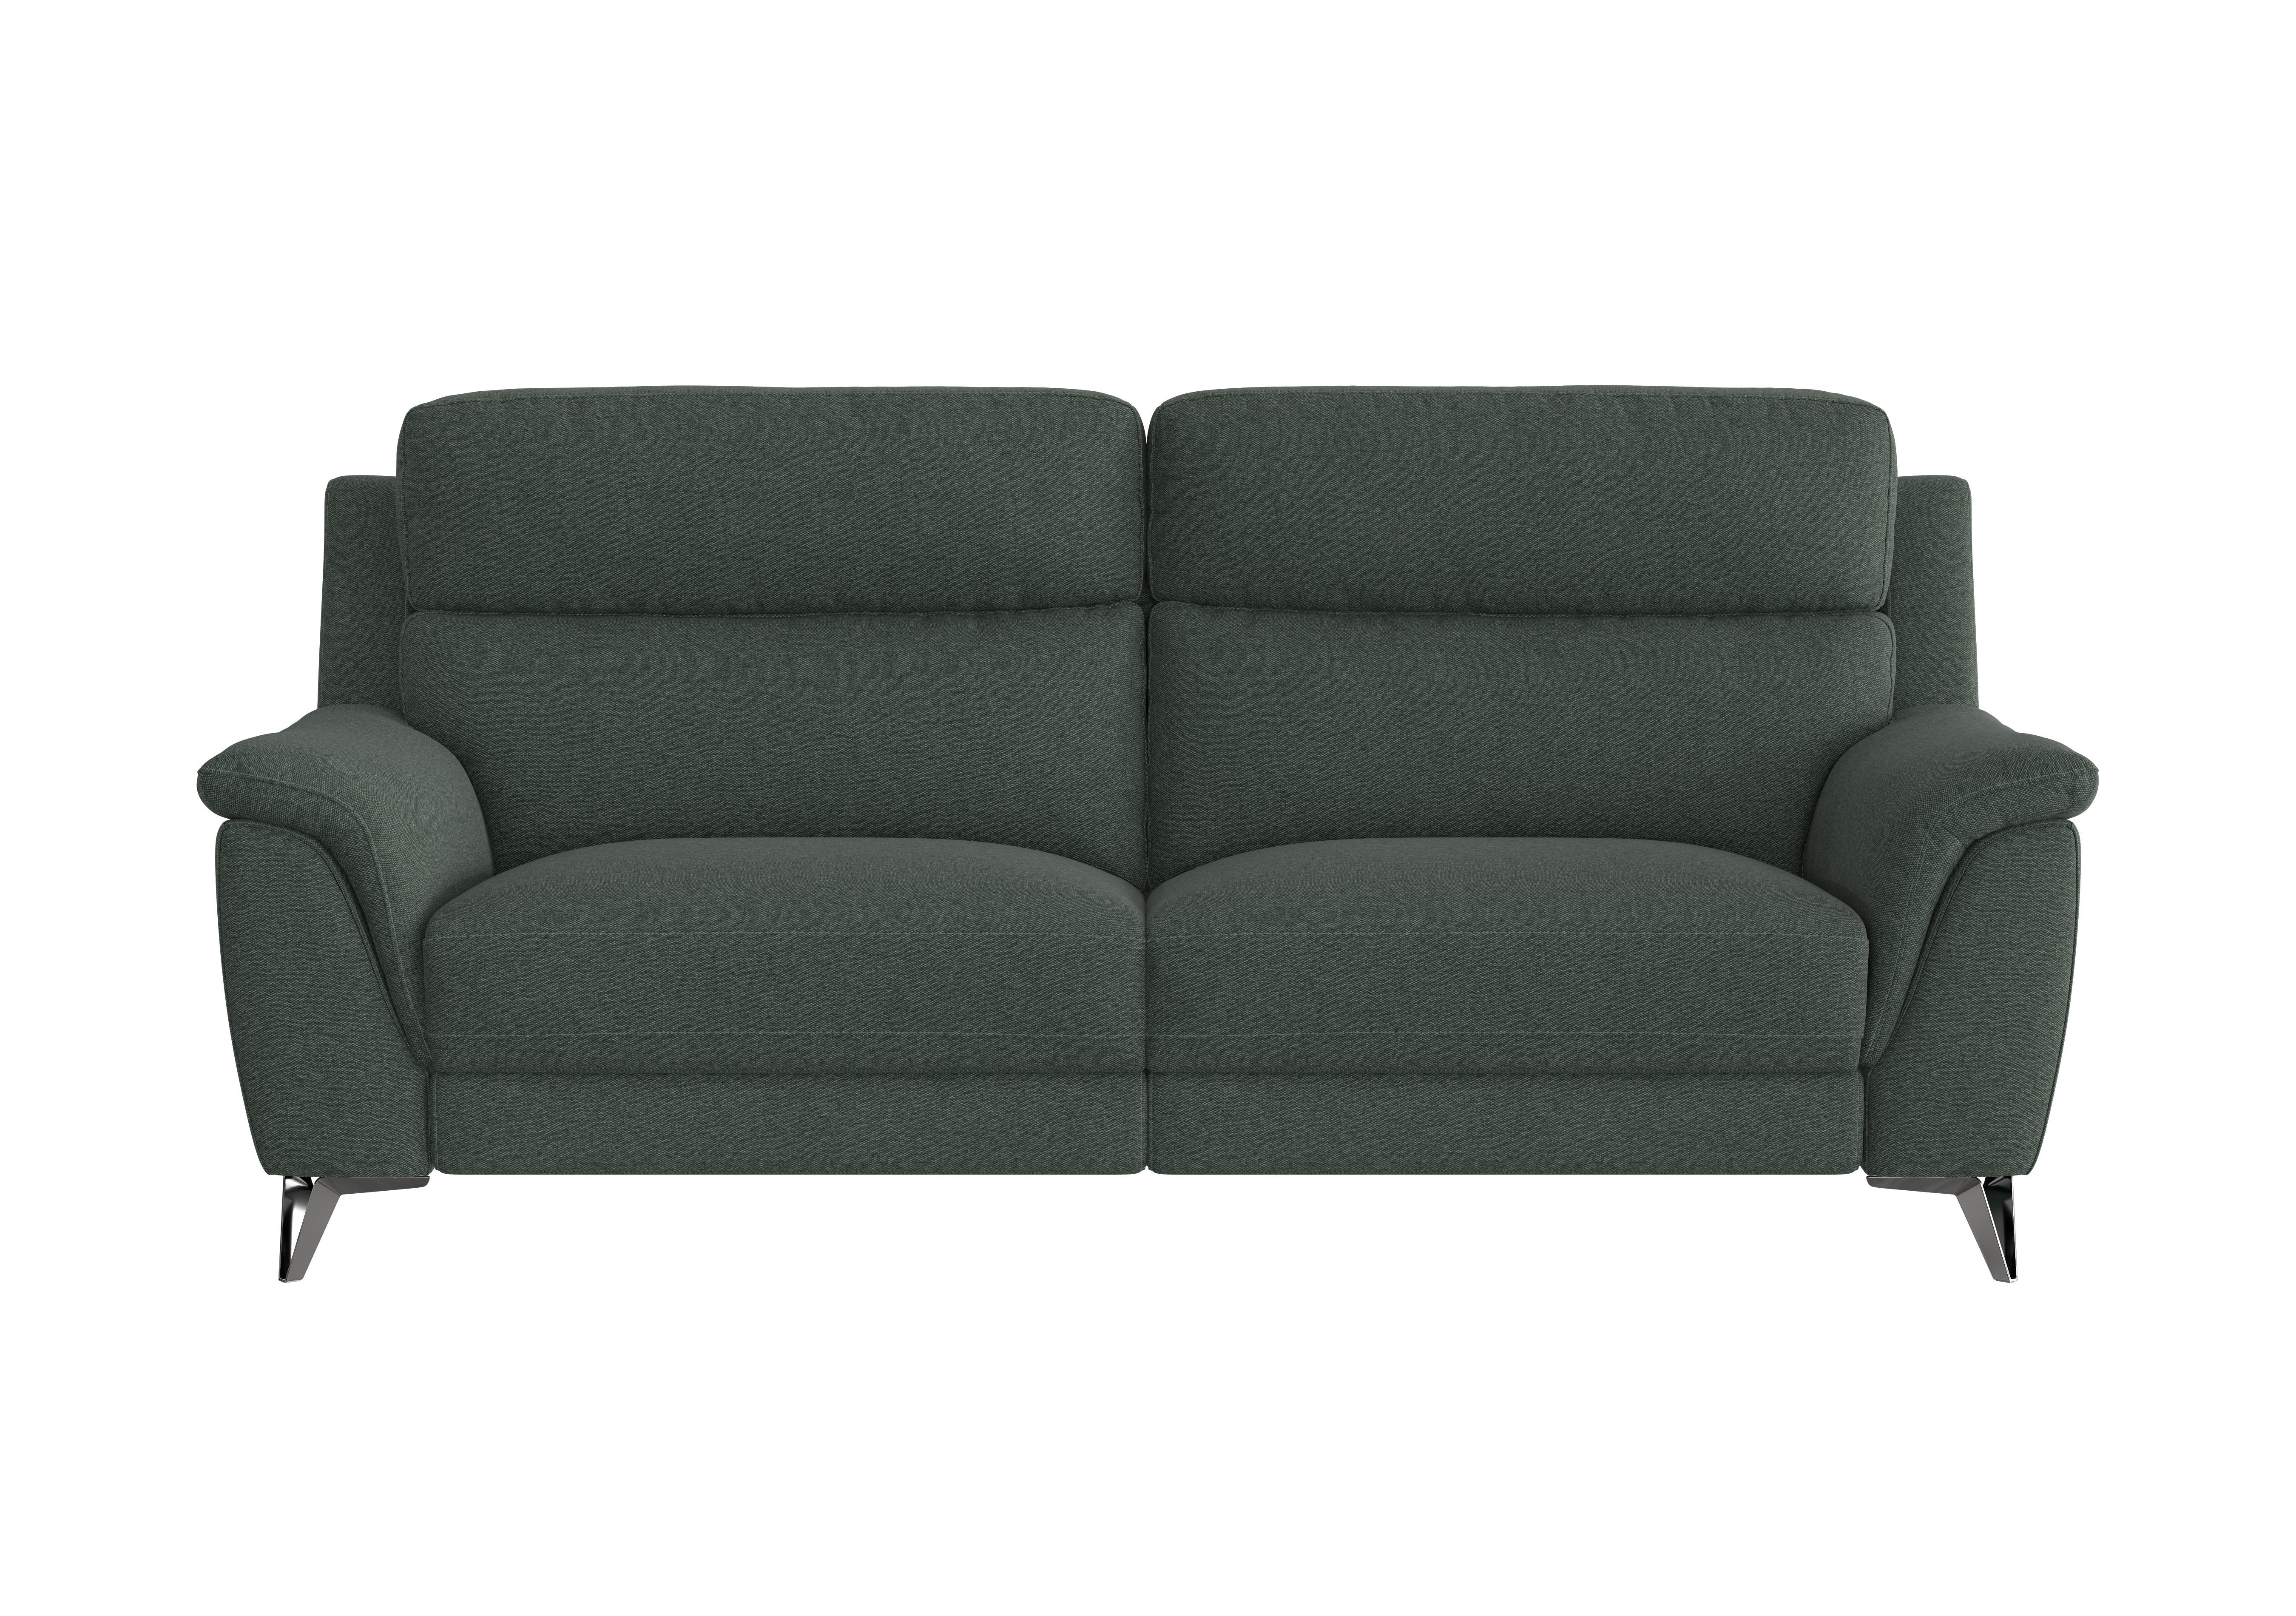 Contempo 3 Seater Fabric Sofa in Fab-Ska-R48 Moss Green on Furniture Village